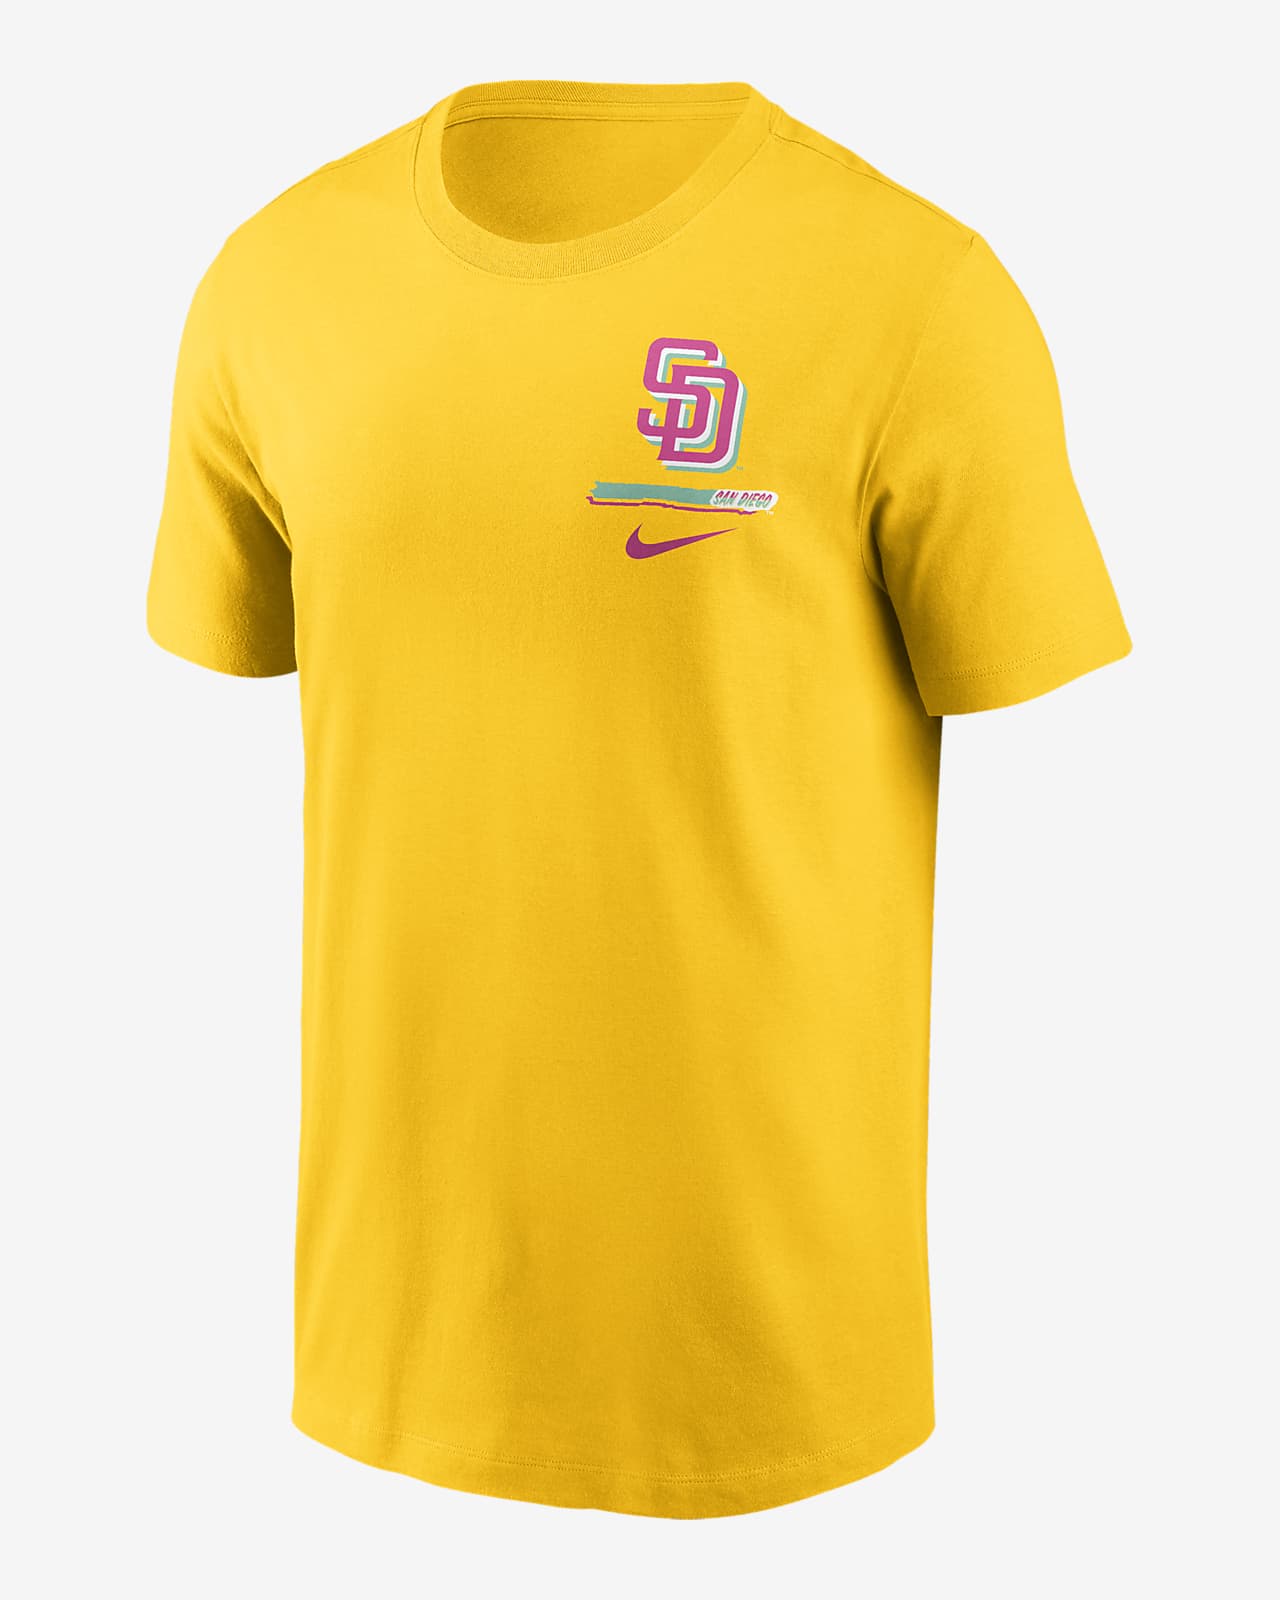 padres city connect polo